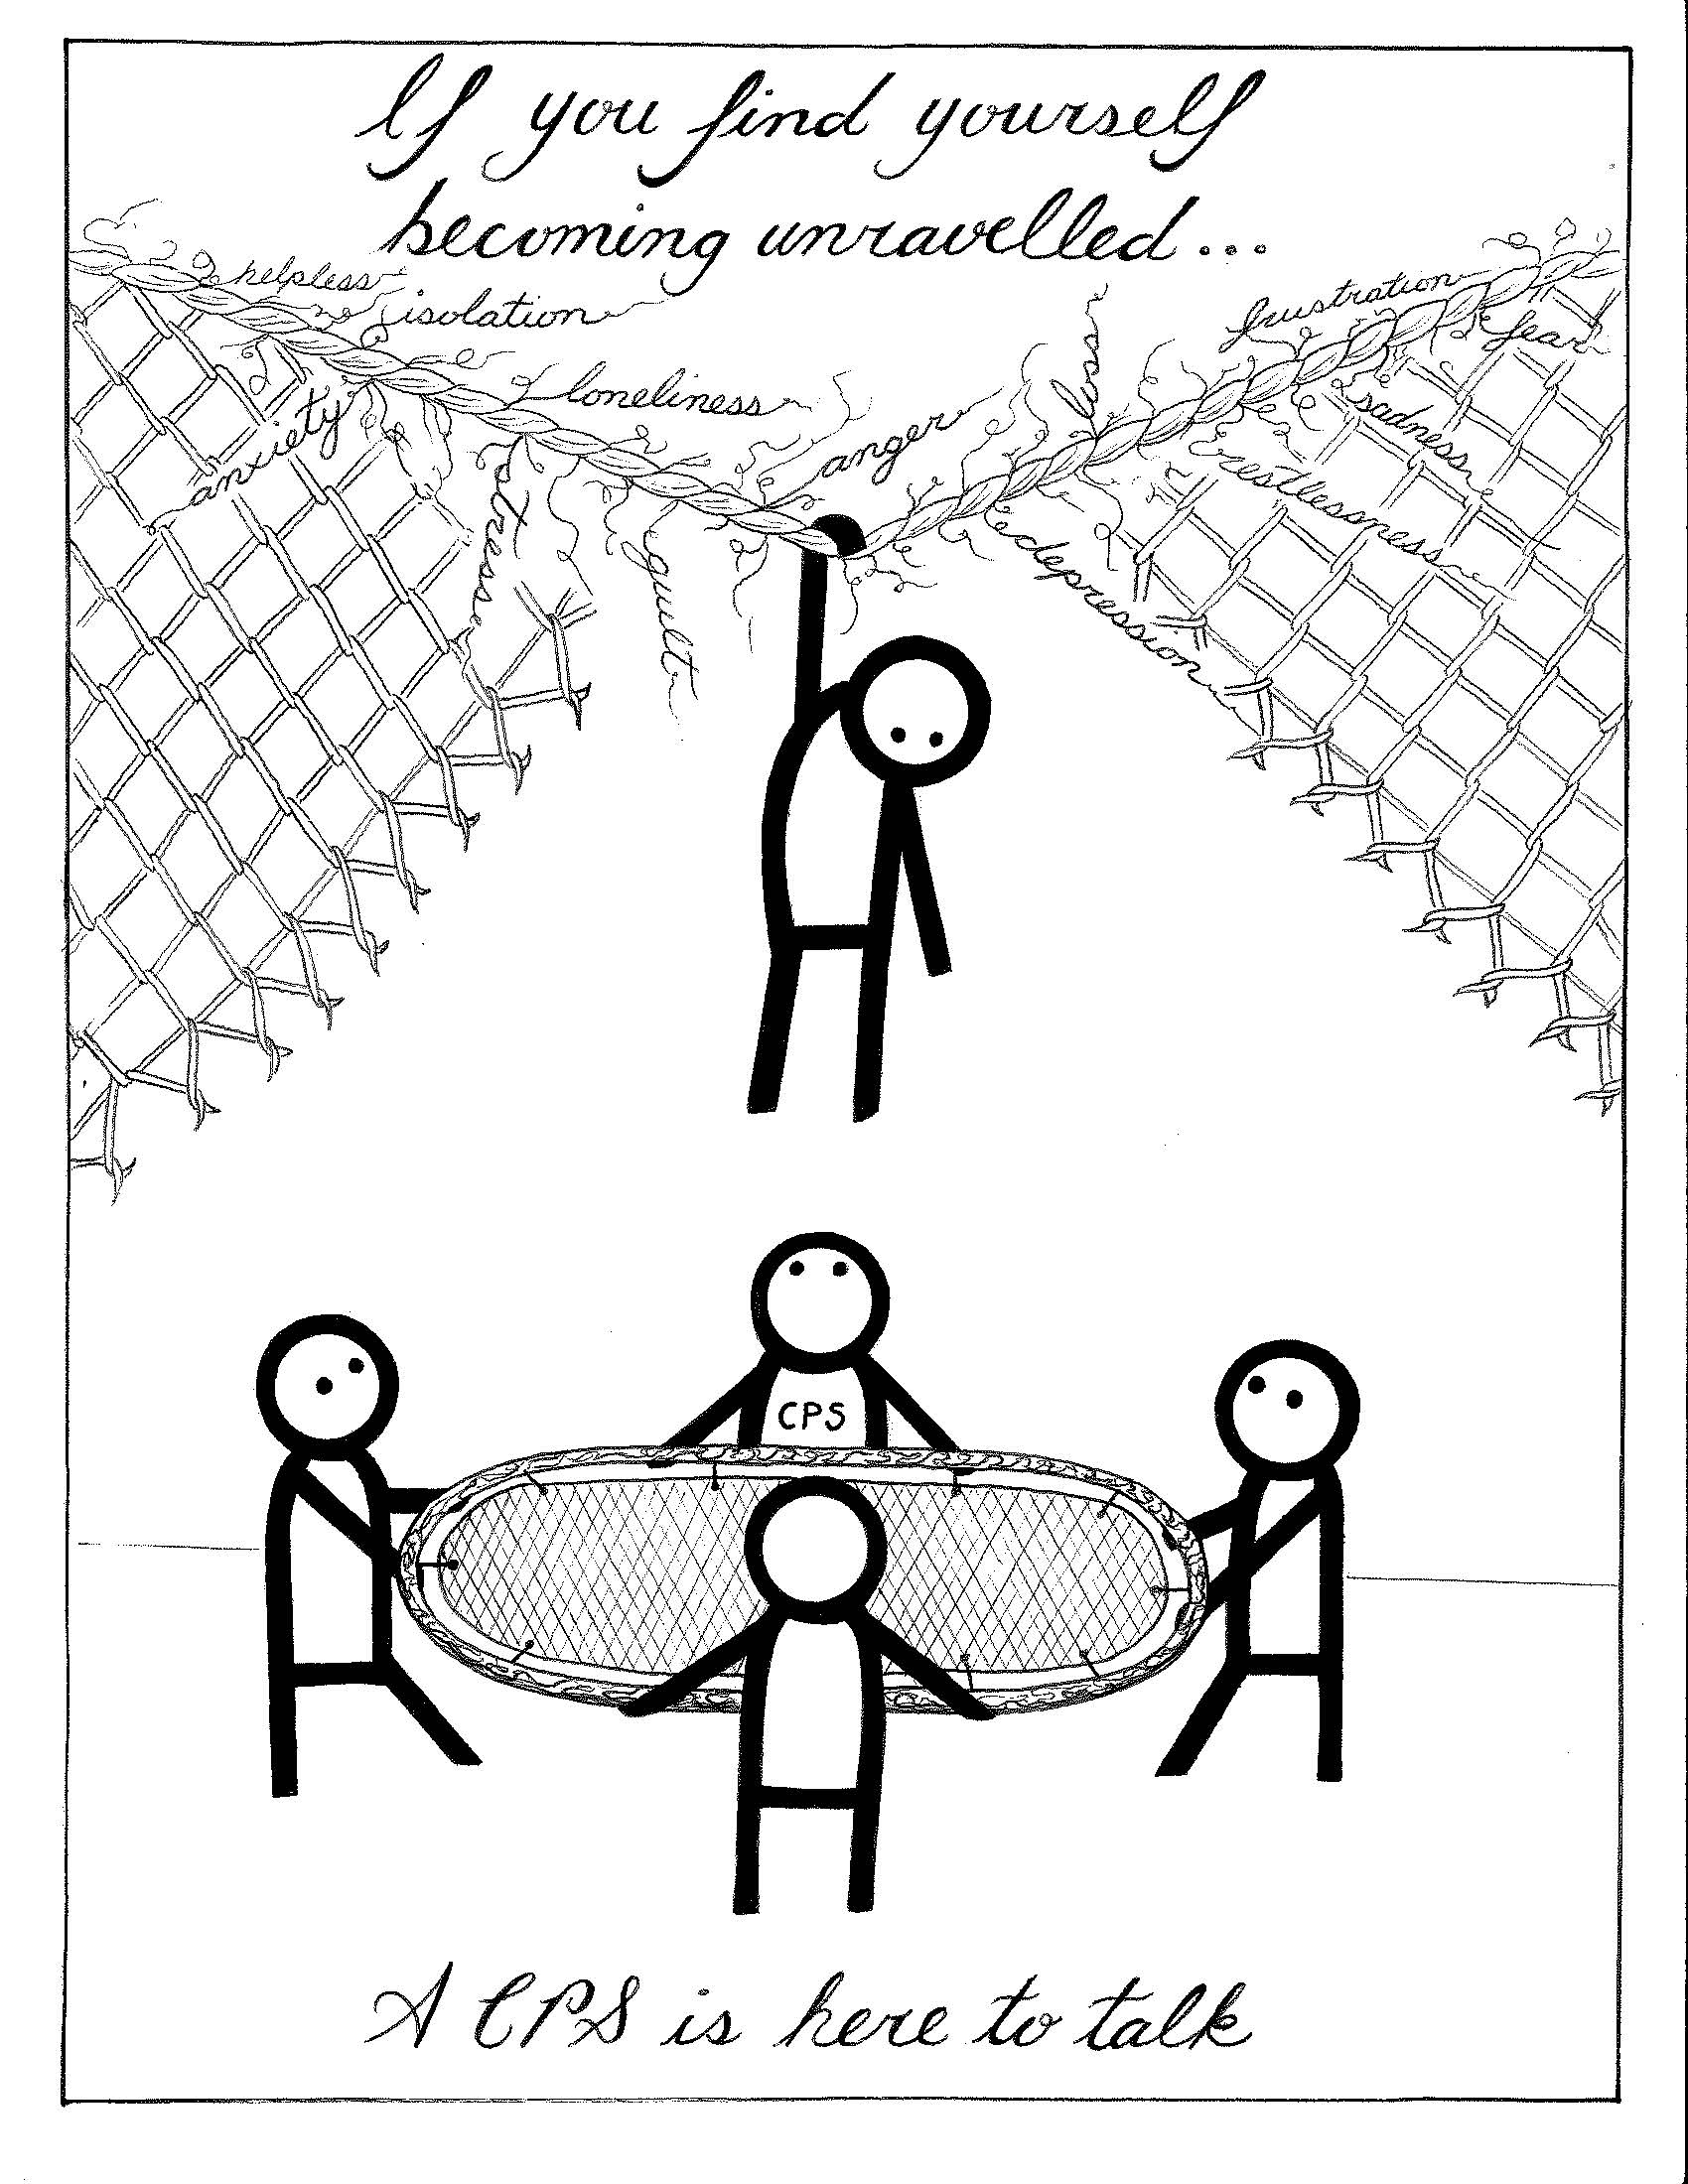 A black and white drawing of stick figures holding a trampoline while another jumps and grabs a fence. It says "If you find your